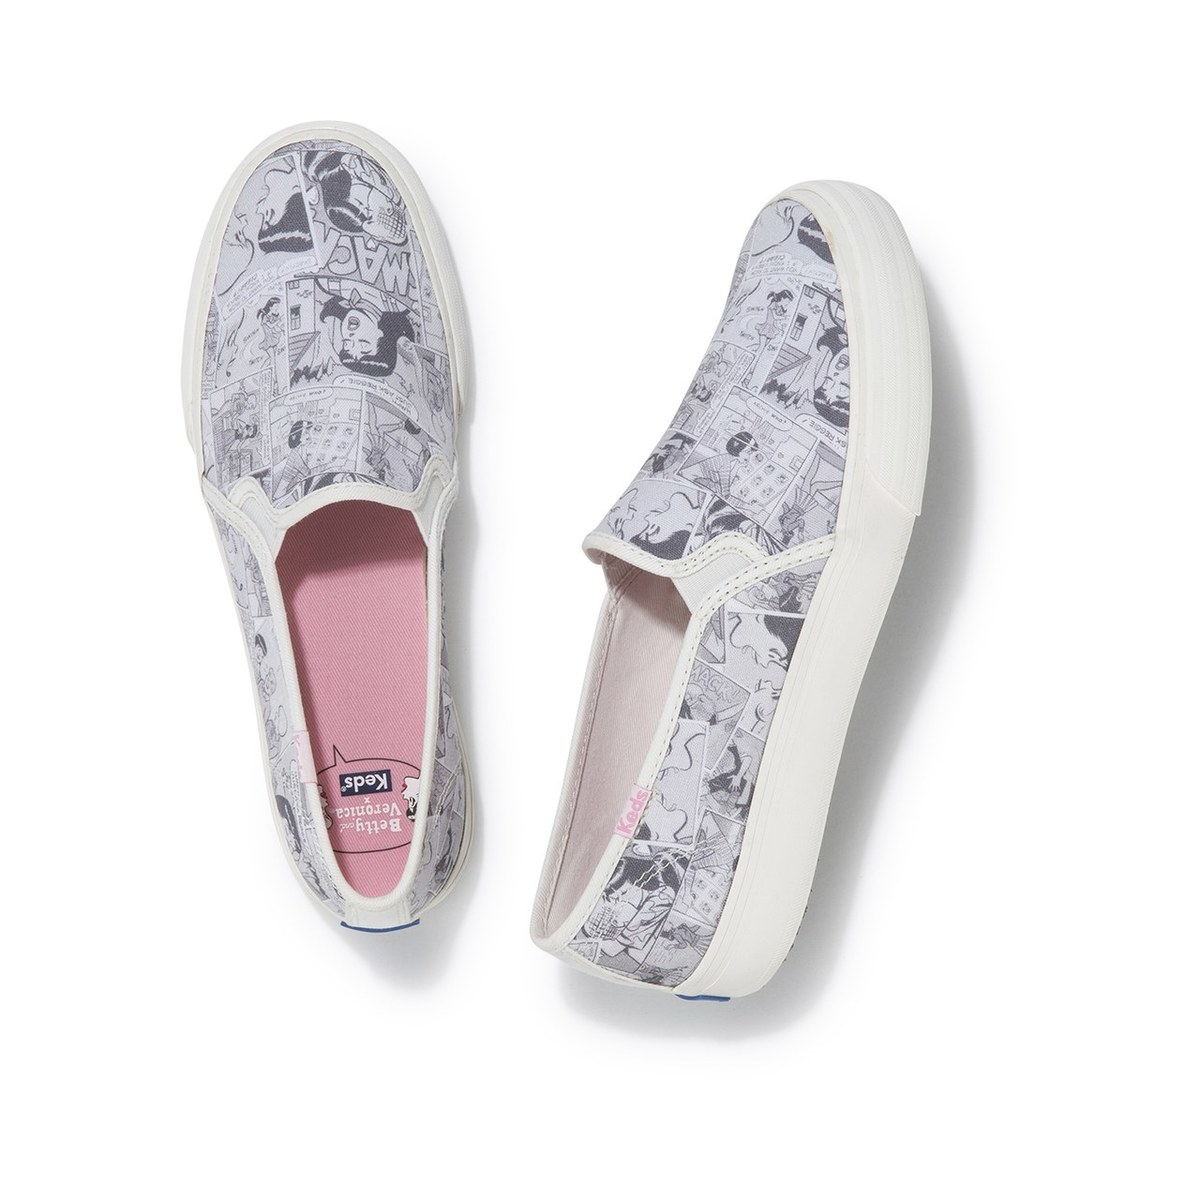 Keds Have Teamed Up With Riverdale To Create Betty and Veronica Sneakers